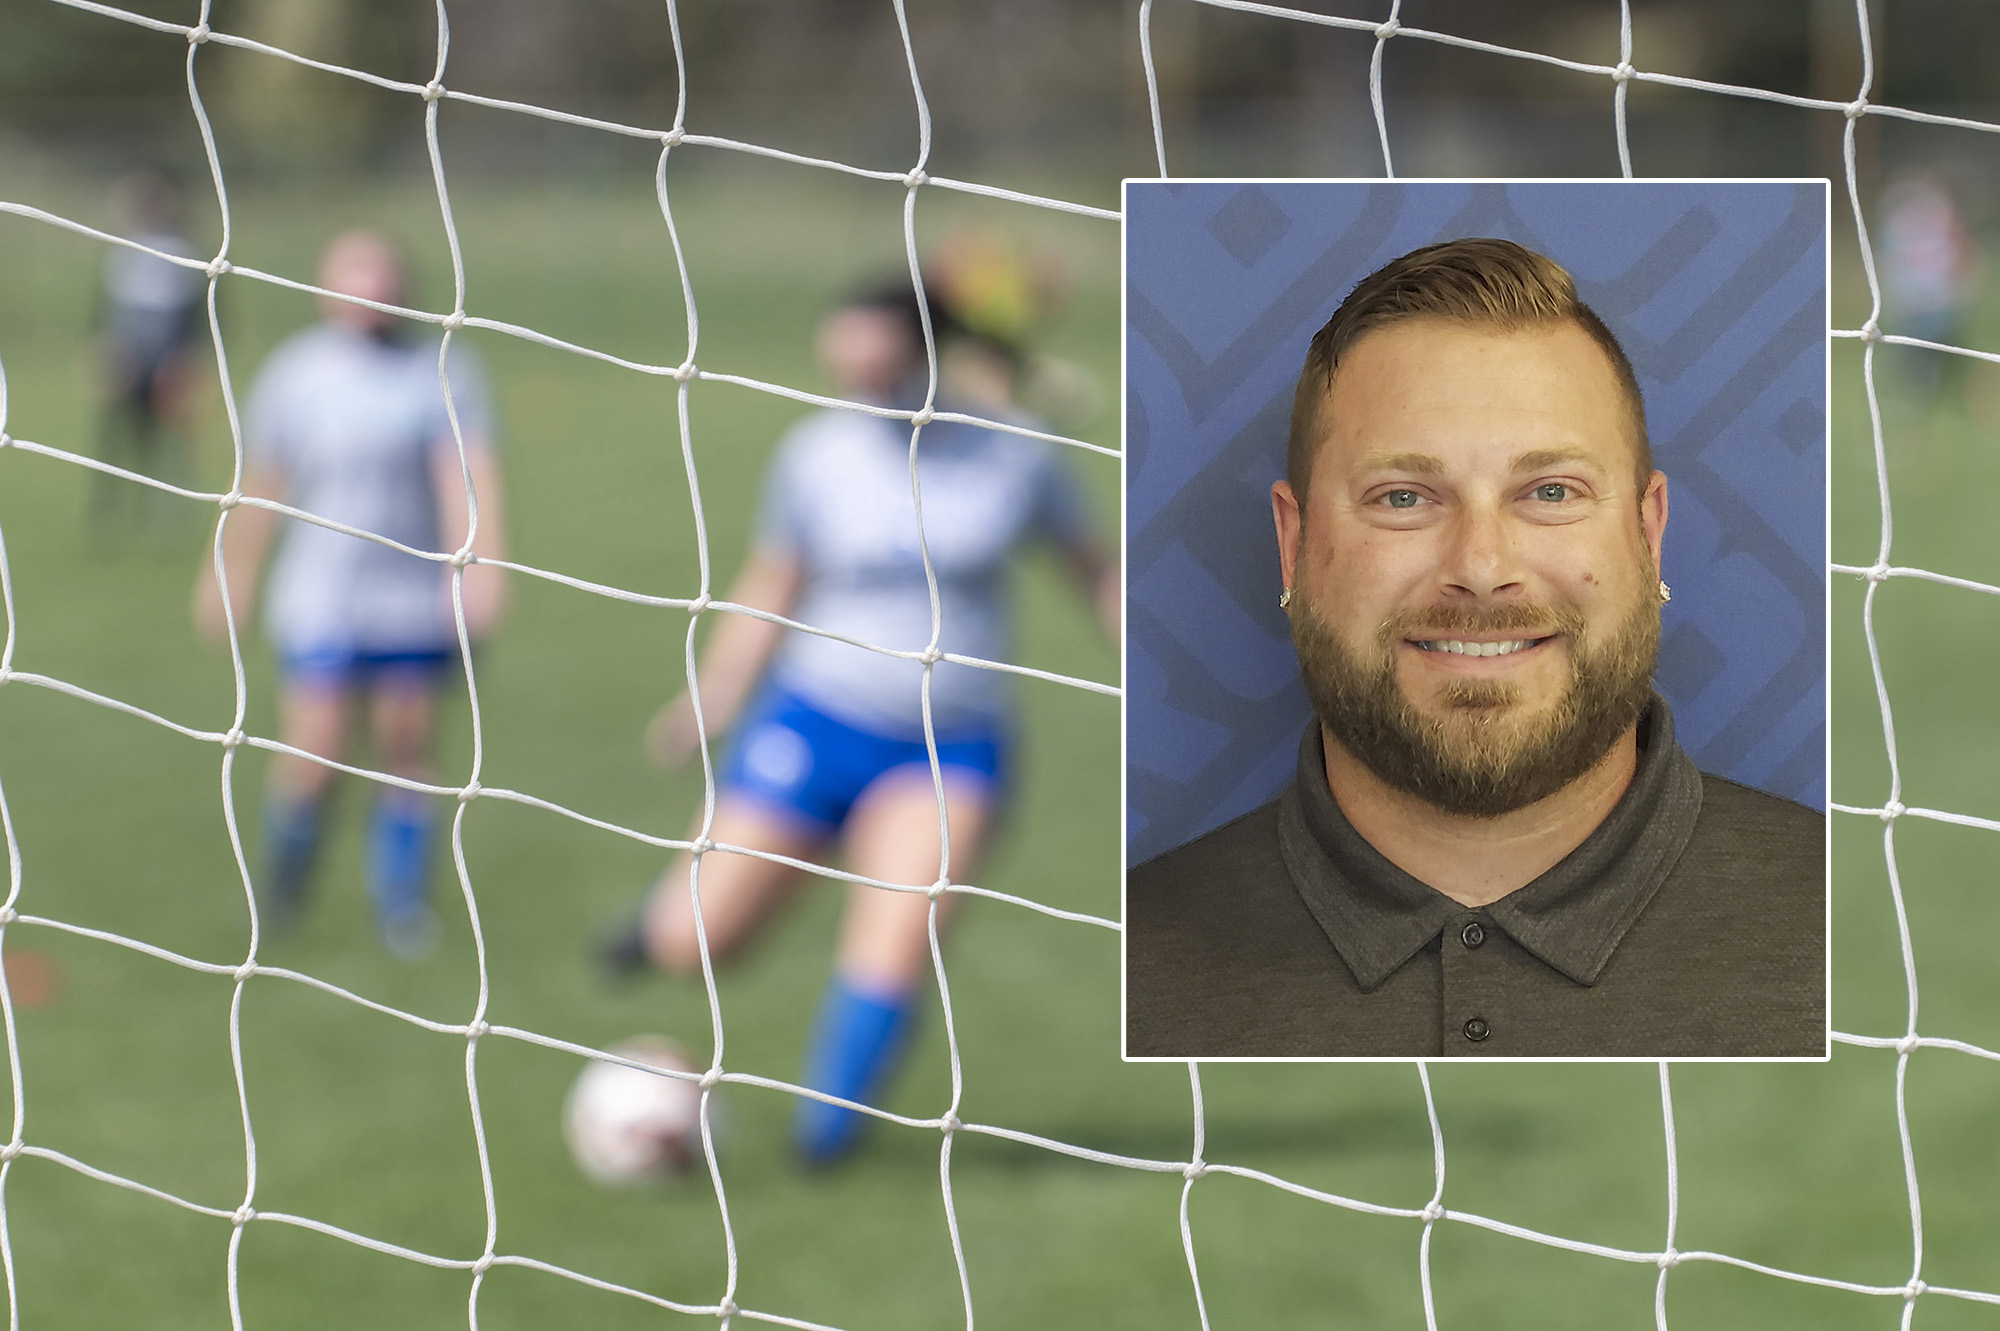 Foreground: A headshot photo of Head Women's Soccer Coach Levi Butcher. Background: A soccer player kicks a ball into the goal.